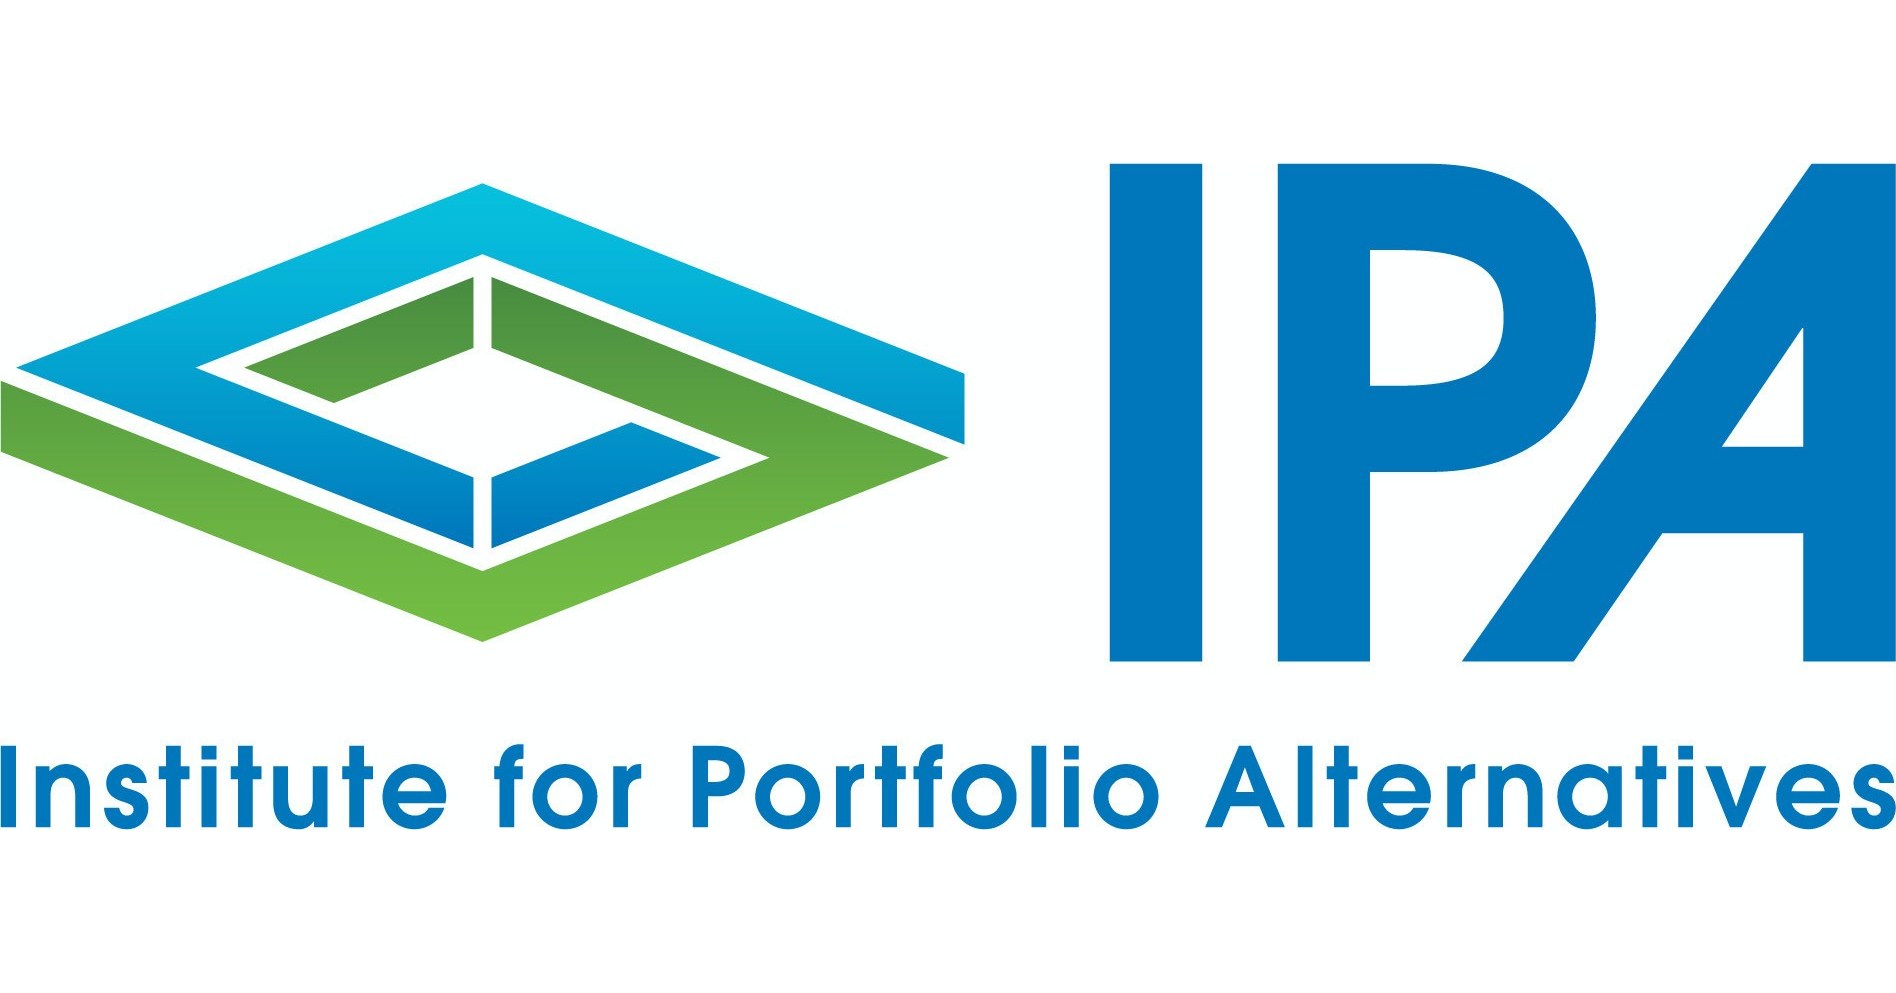 The Institute for Portfolio Alternatives Elects Anne-Marie Vandenberg as 2021 Chair-Elect